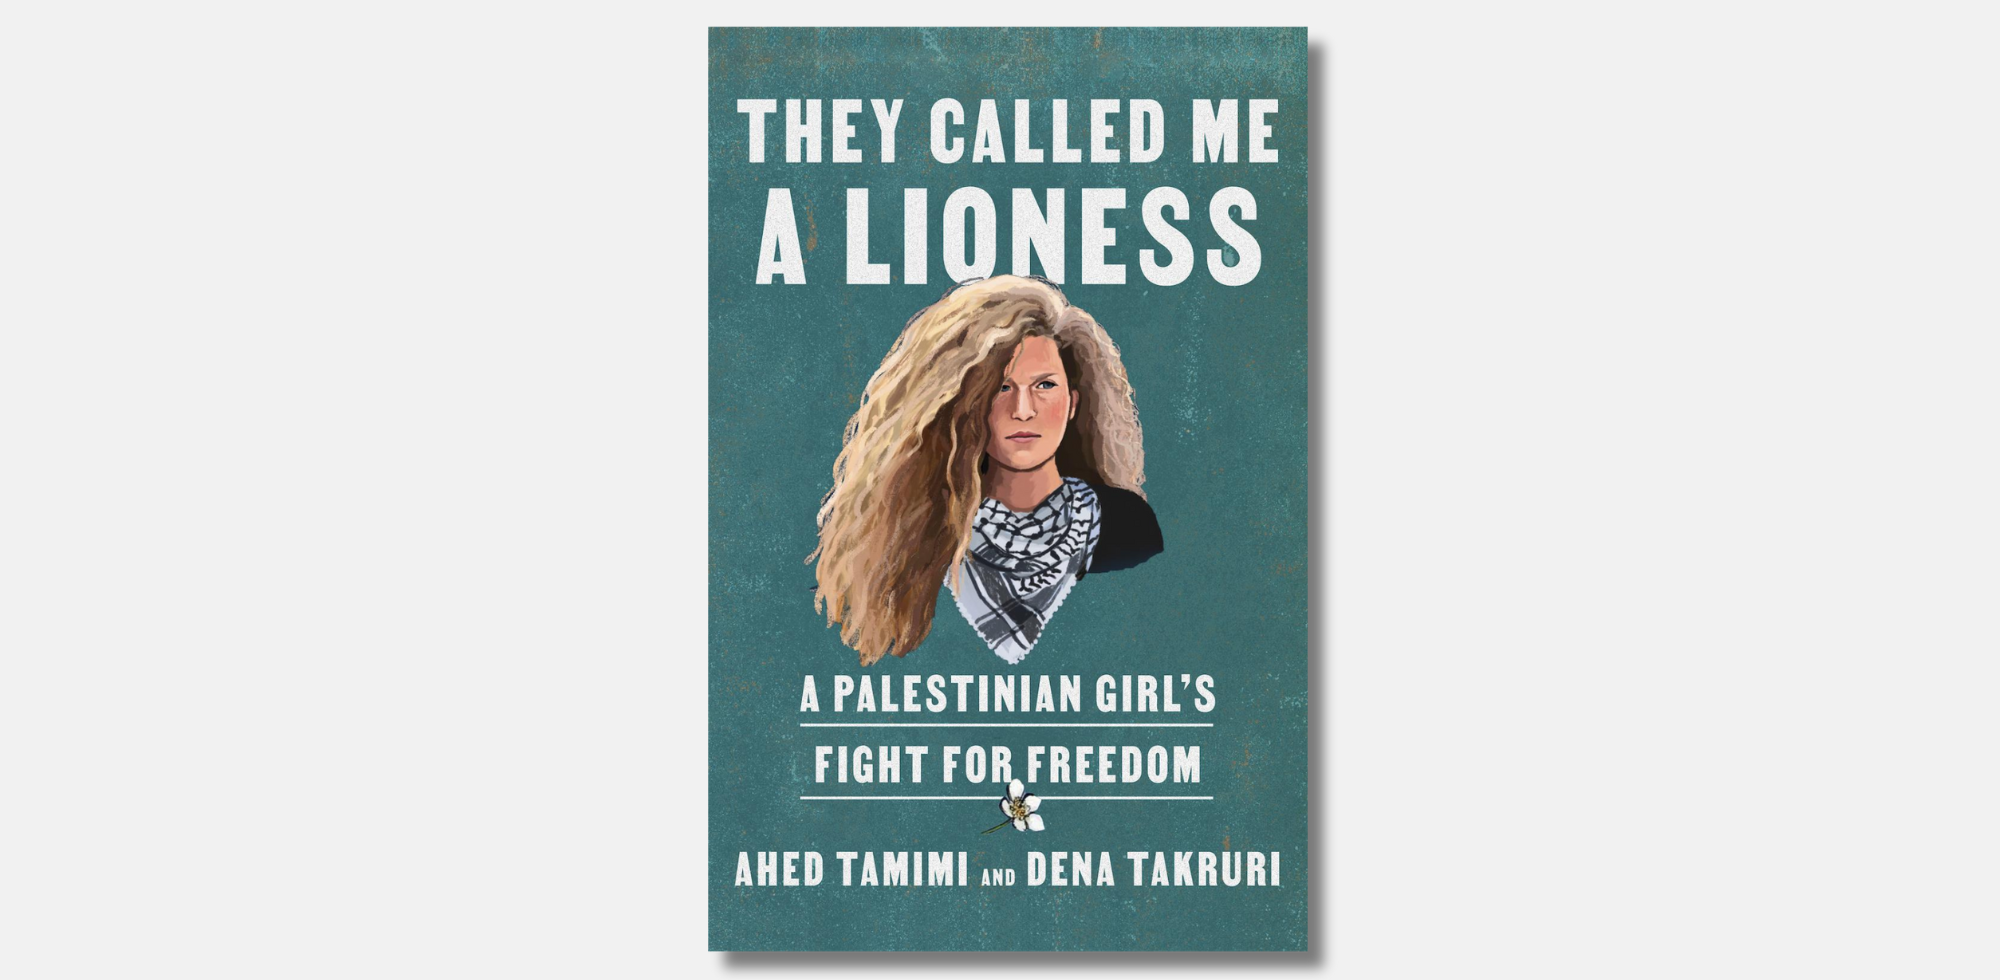 Book cover of They Called Me a Lioness: A Palestinian Girl's Fight for Freedom by Ahed Tamimi and Bena Takruri